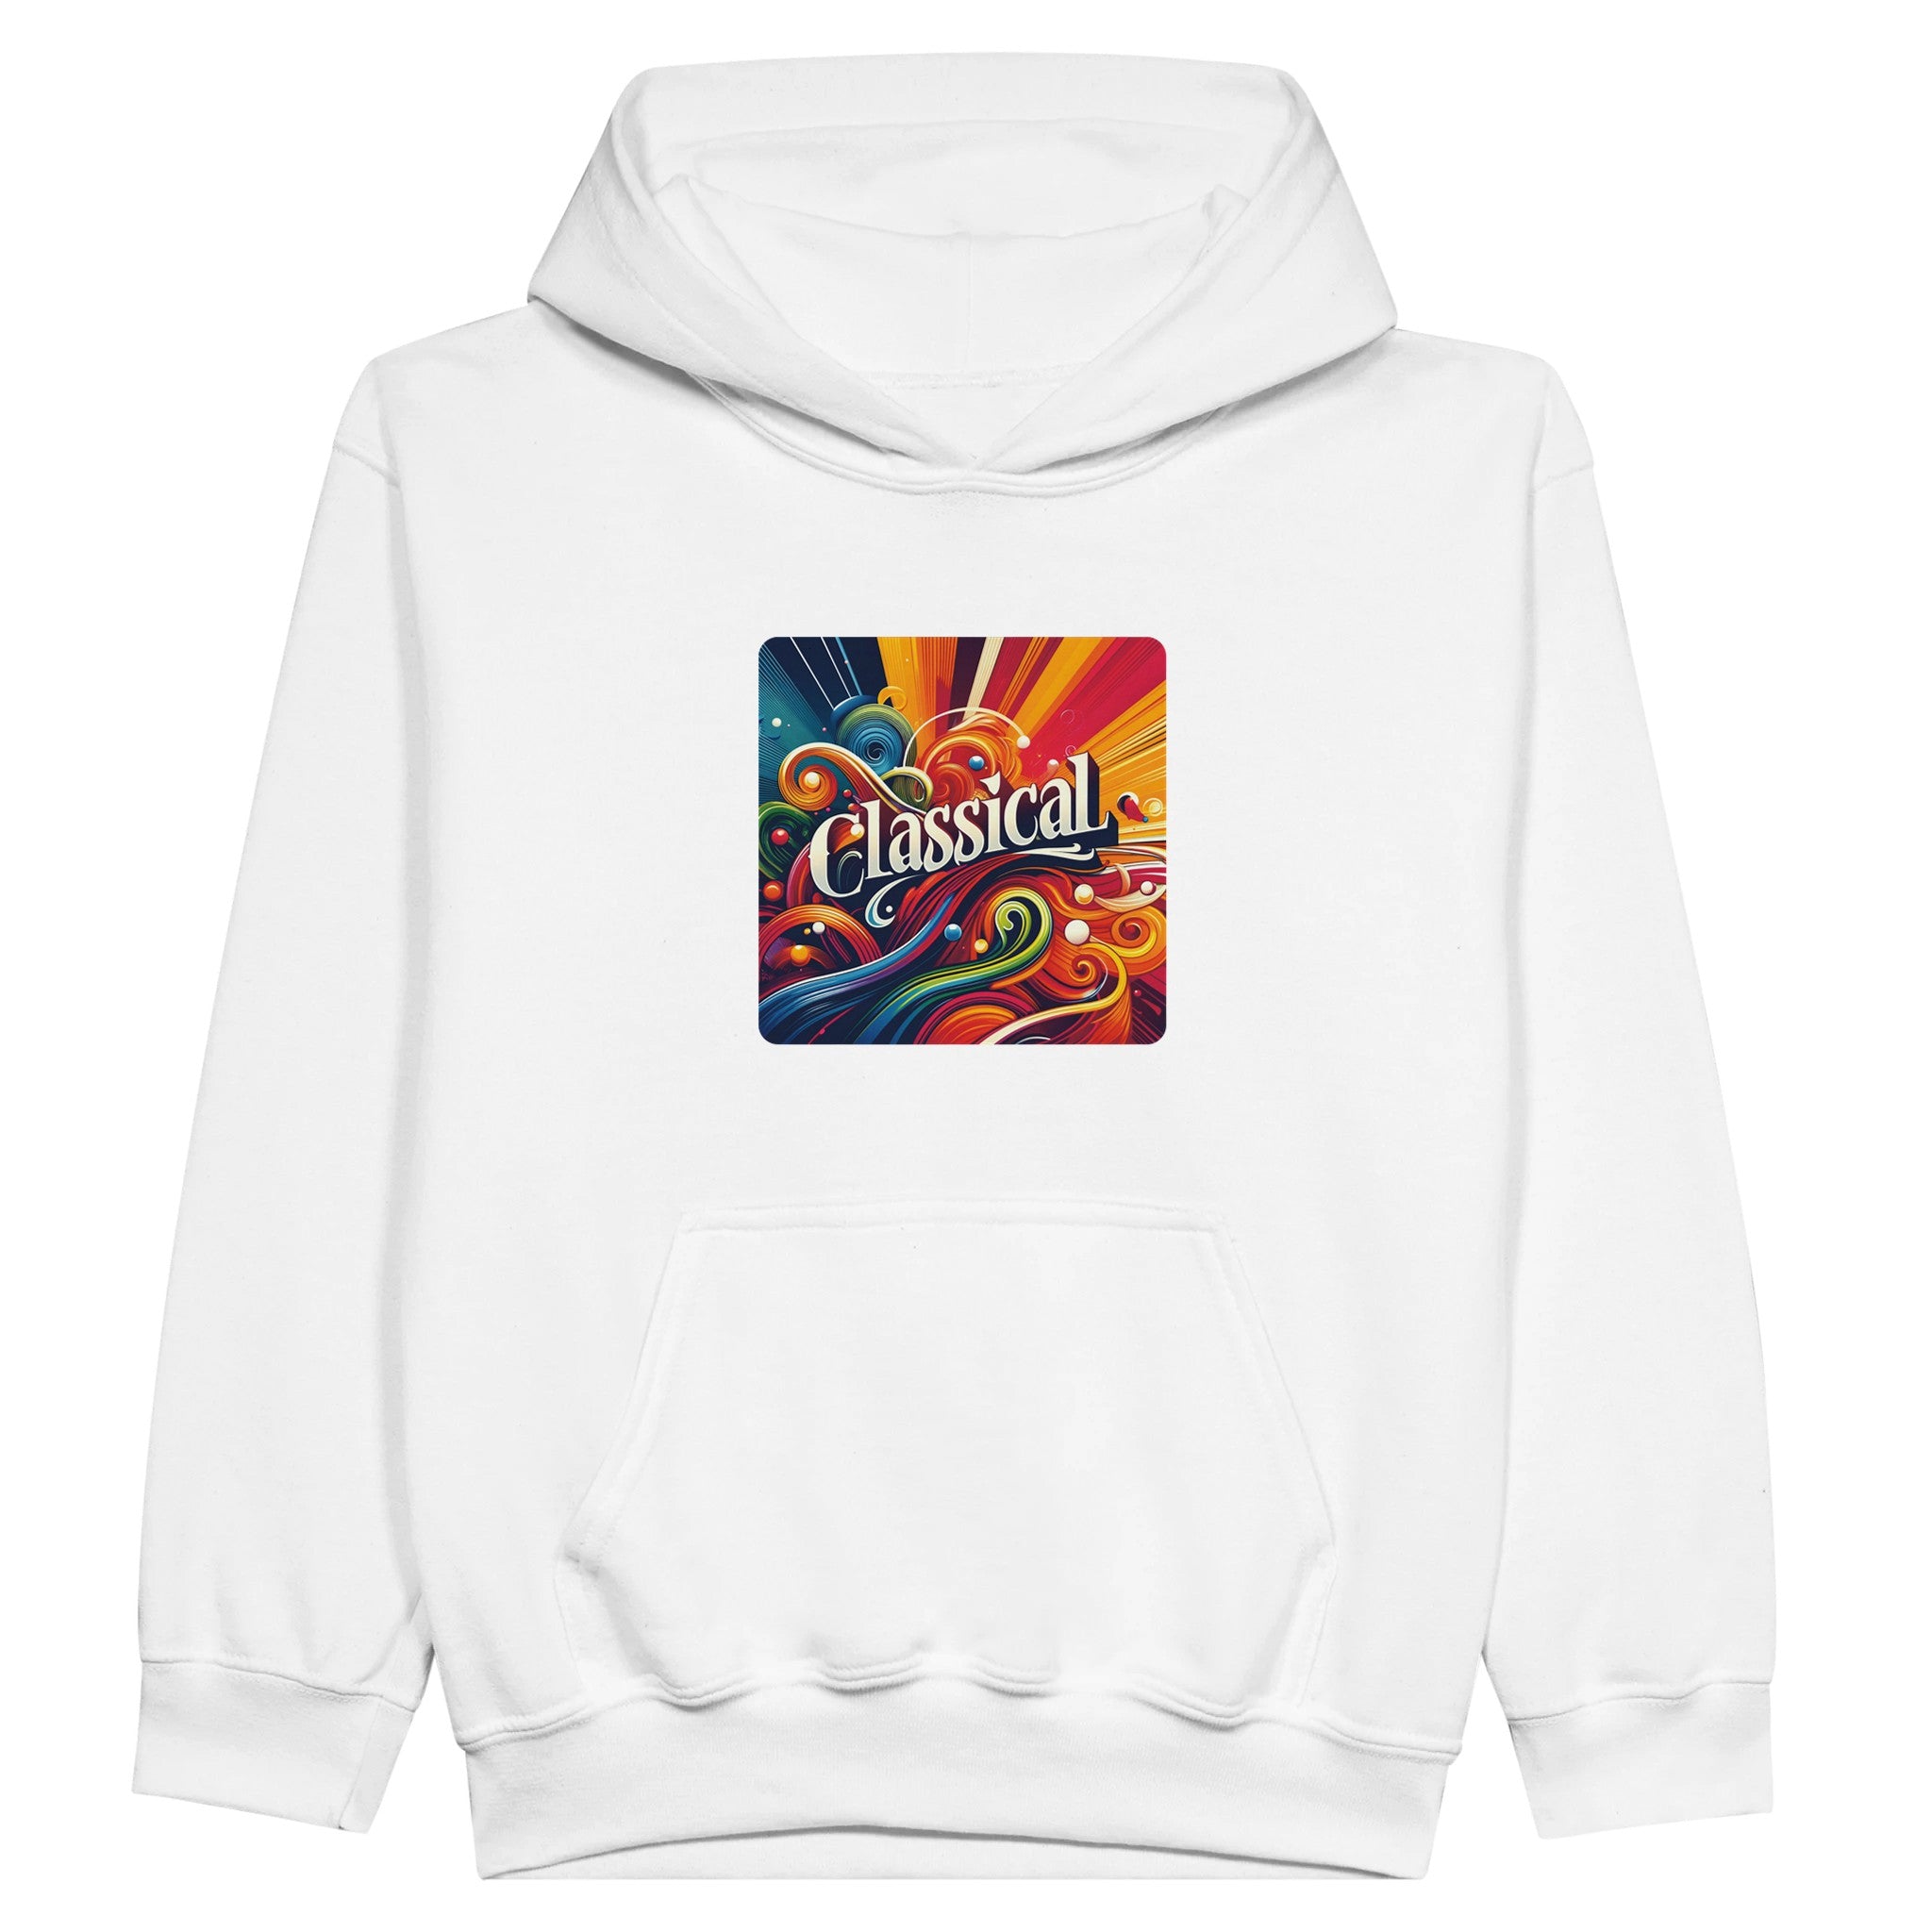 "Love Classical" Classic Kids Pullover Hoodie